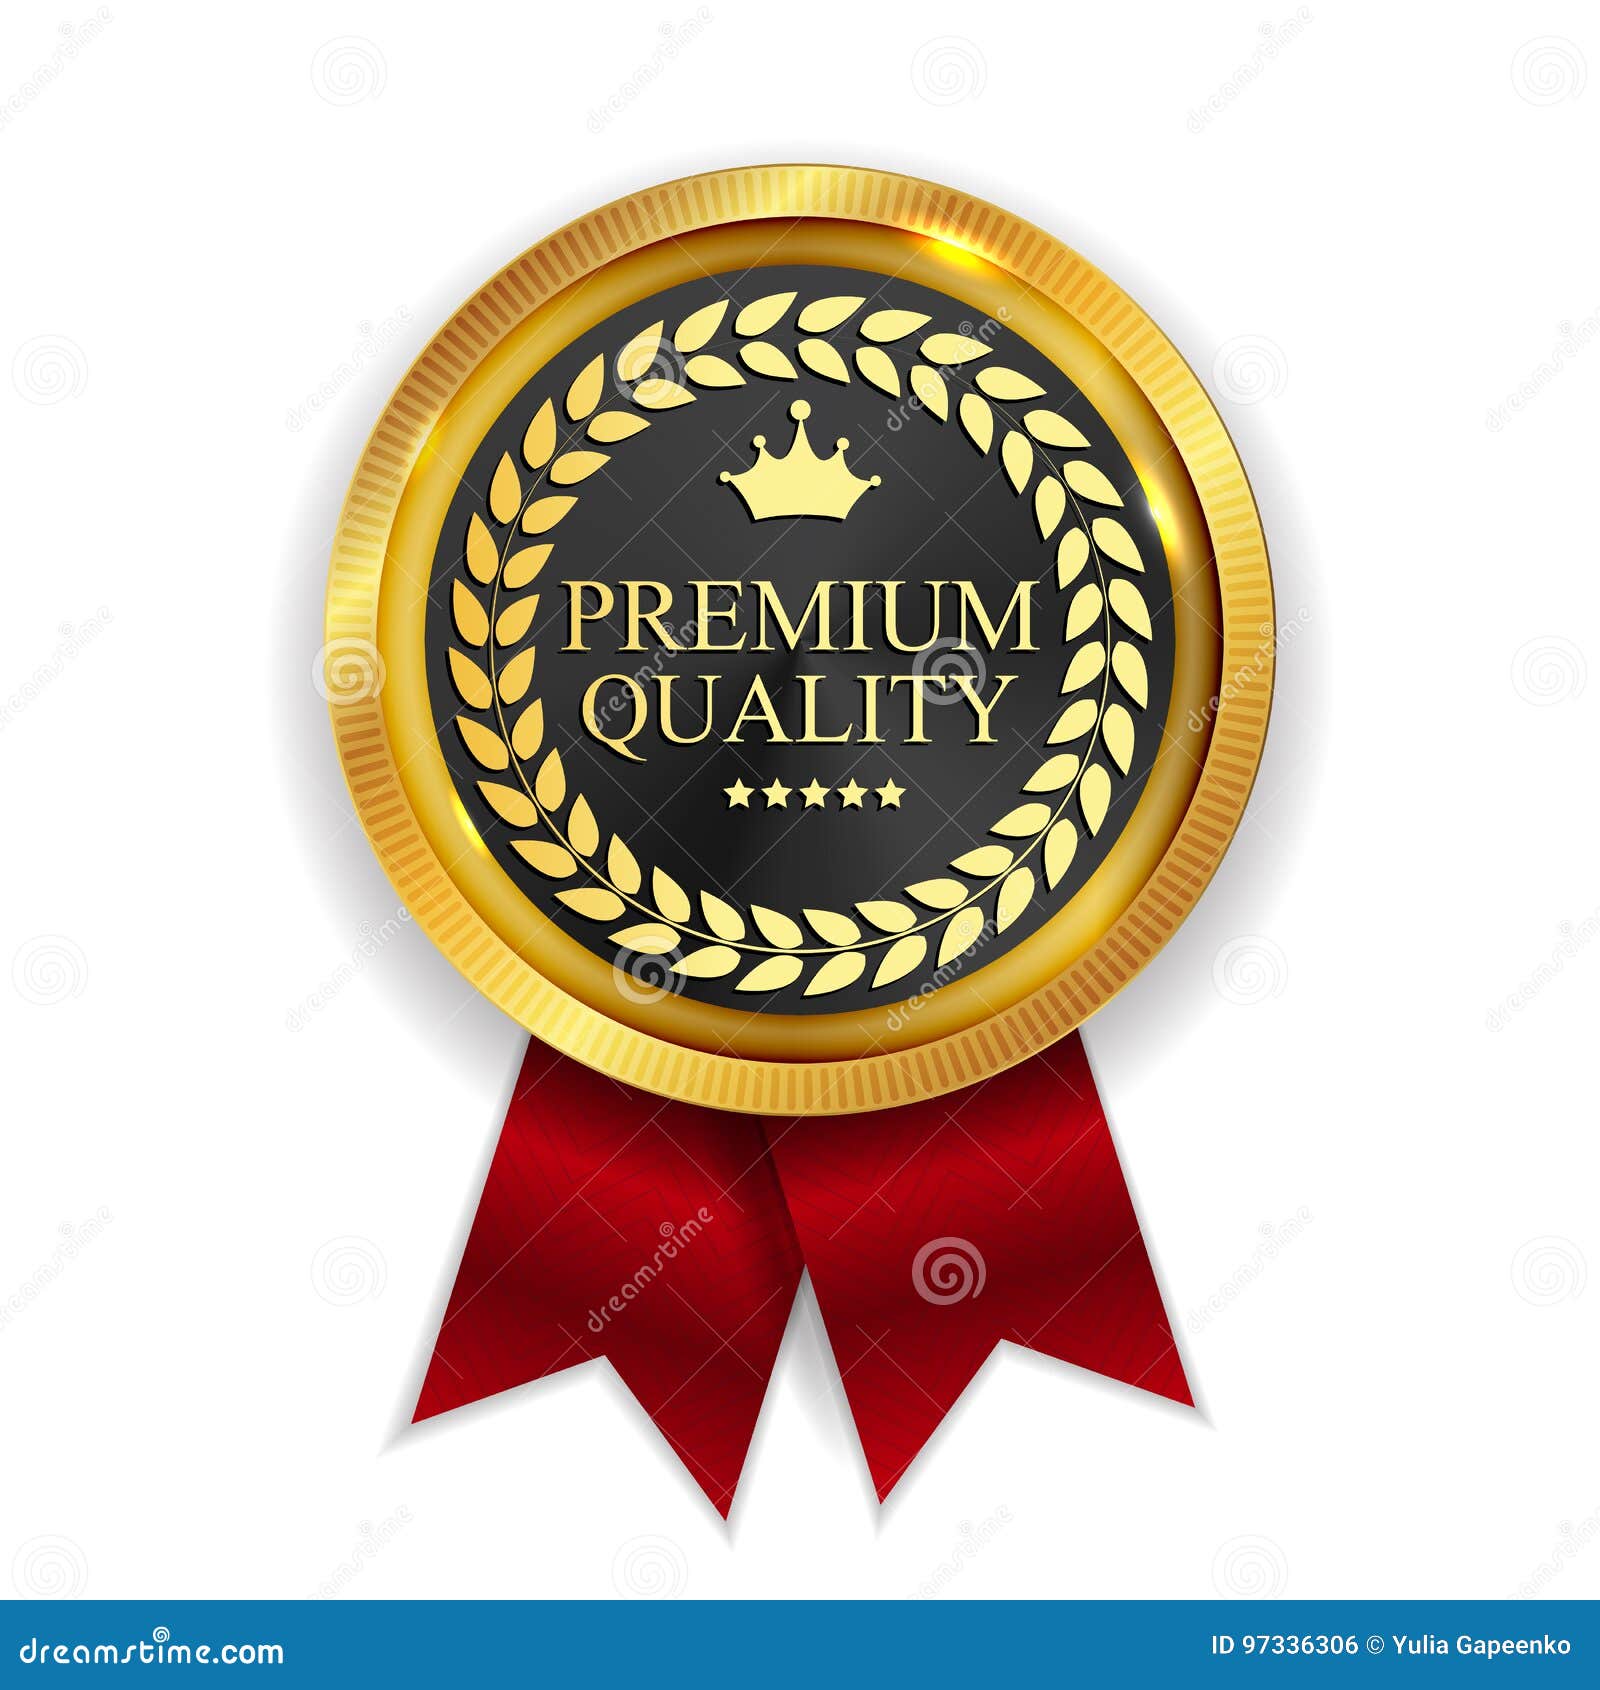 premium quality golden medal icon seal sign on white b